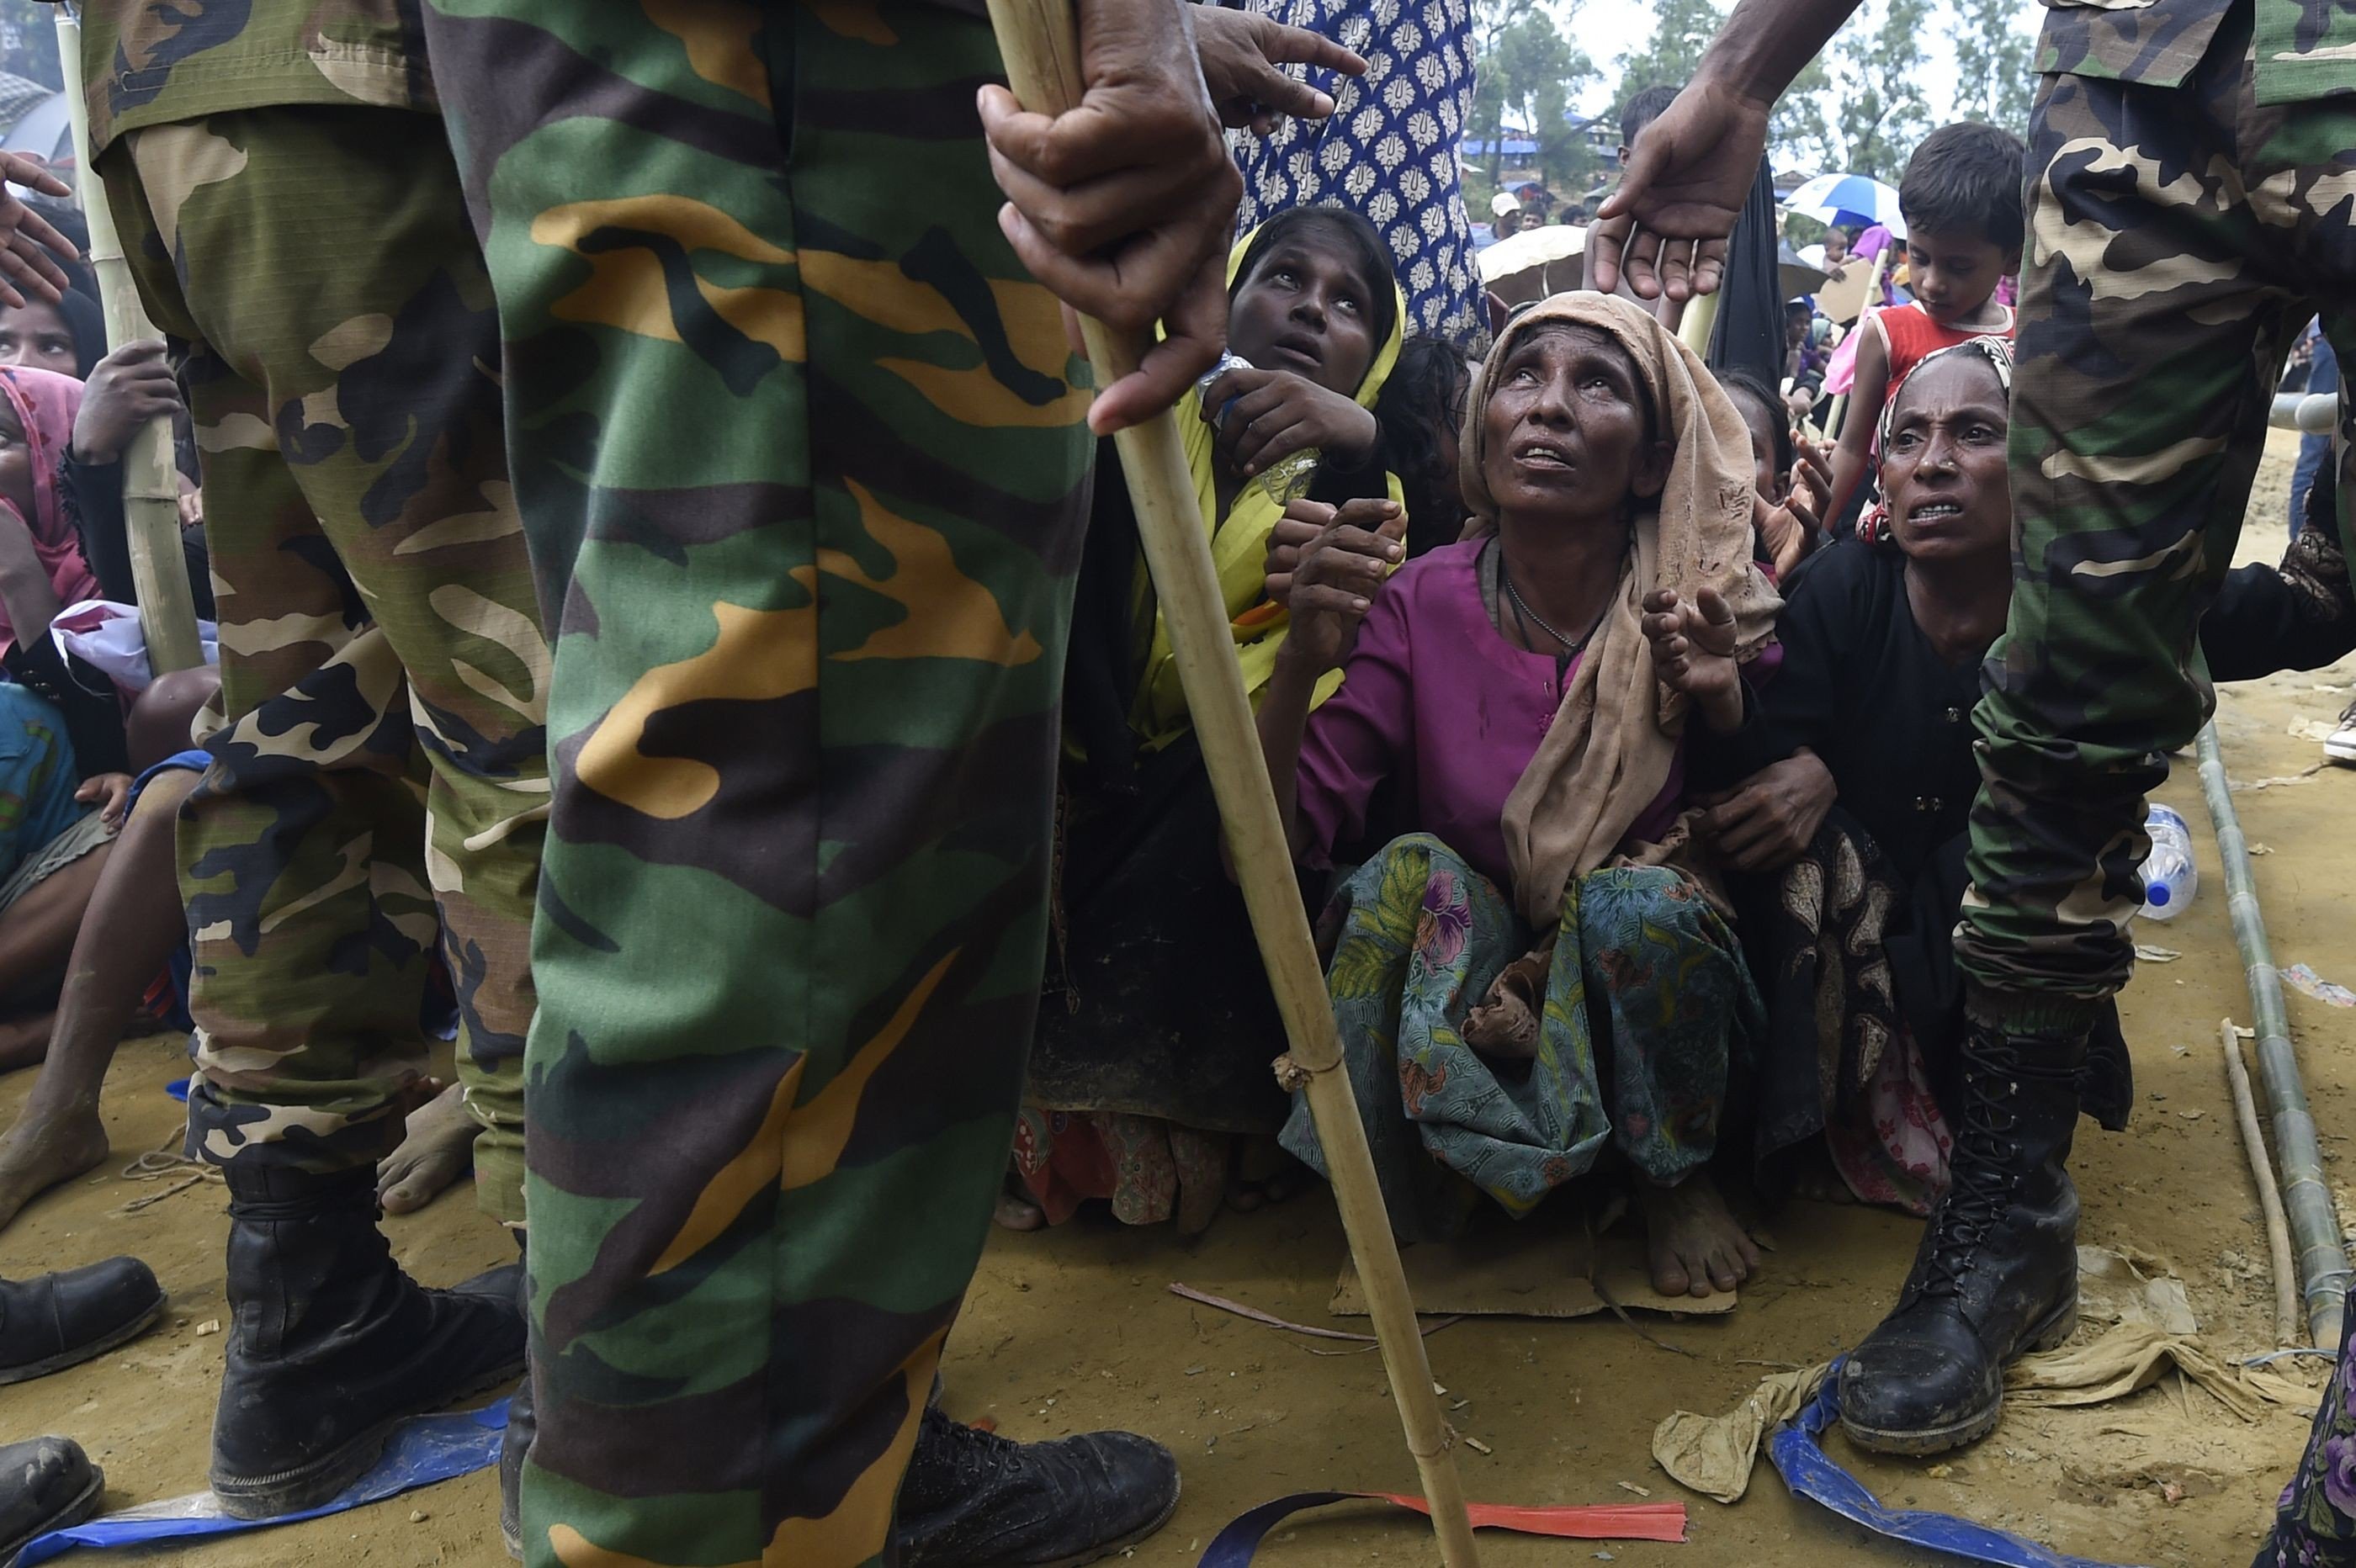 Rohingya refugees wait for food to be distributed by the Bangladesh army at the Balukhali refugee camp in Cox’s Bazar. With Bangladesh already hosting tens of thousands of Rohingya who have fled Myanmar over the years, this latest wave poses significant risks not only to Bangladesh, but to the region as a whole. Photo: AFP